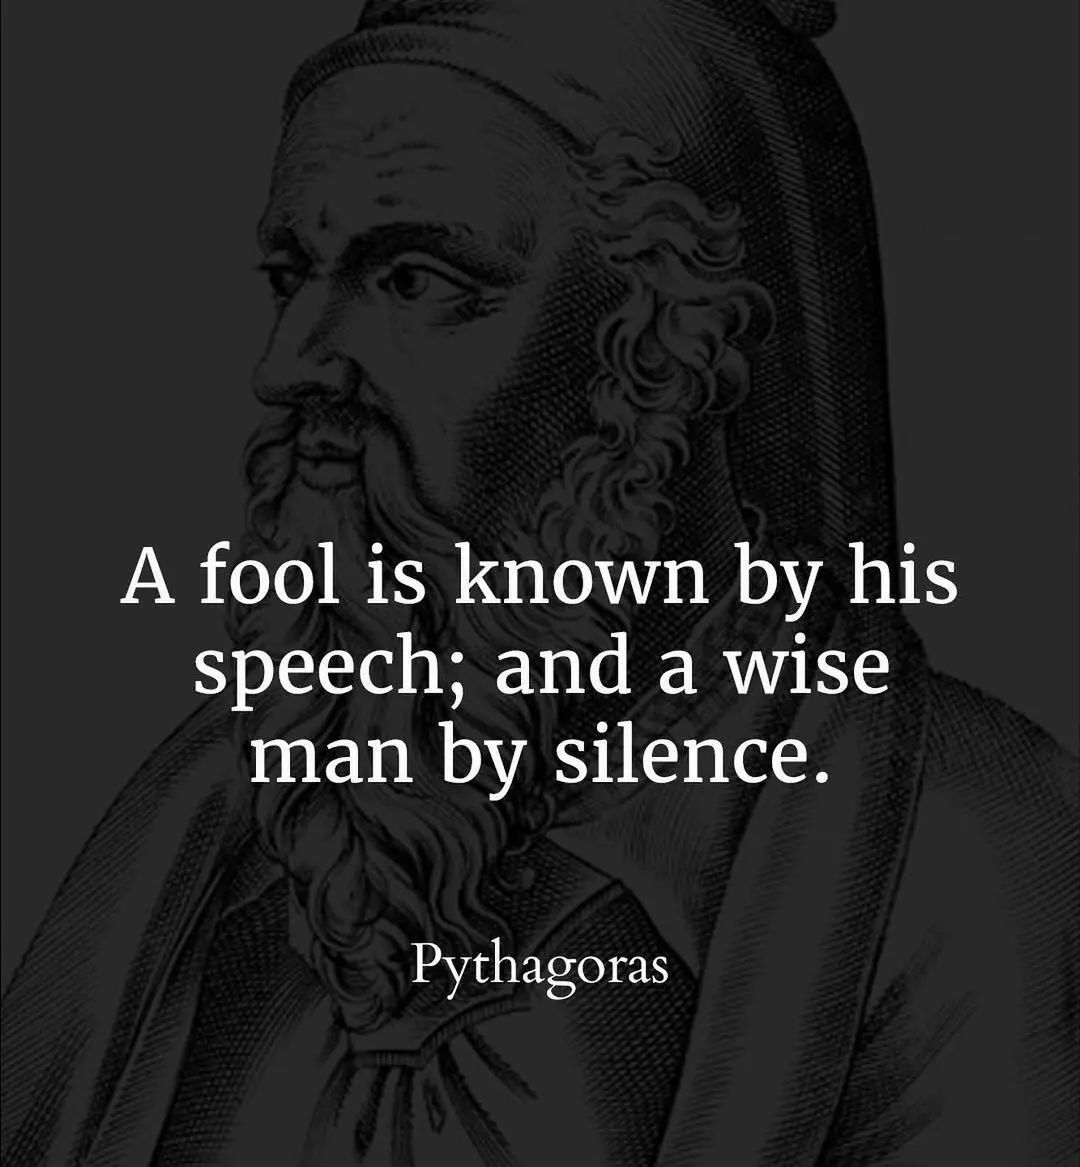 A fool is known by his speech and a wise man by silence – Pythagoras